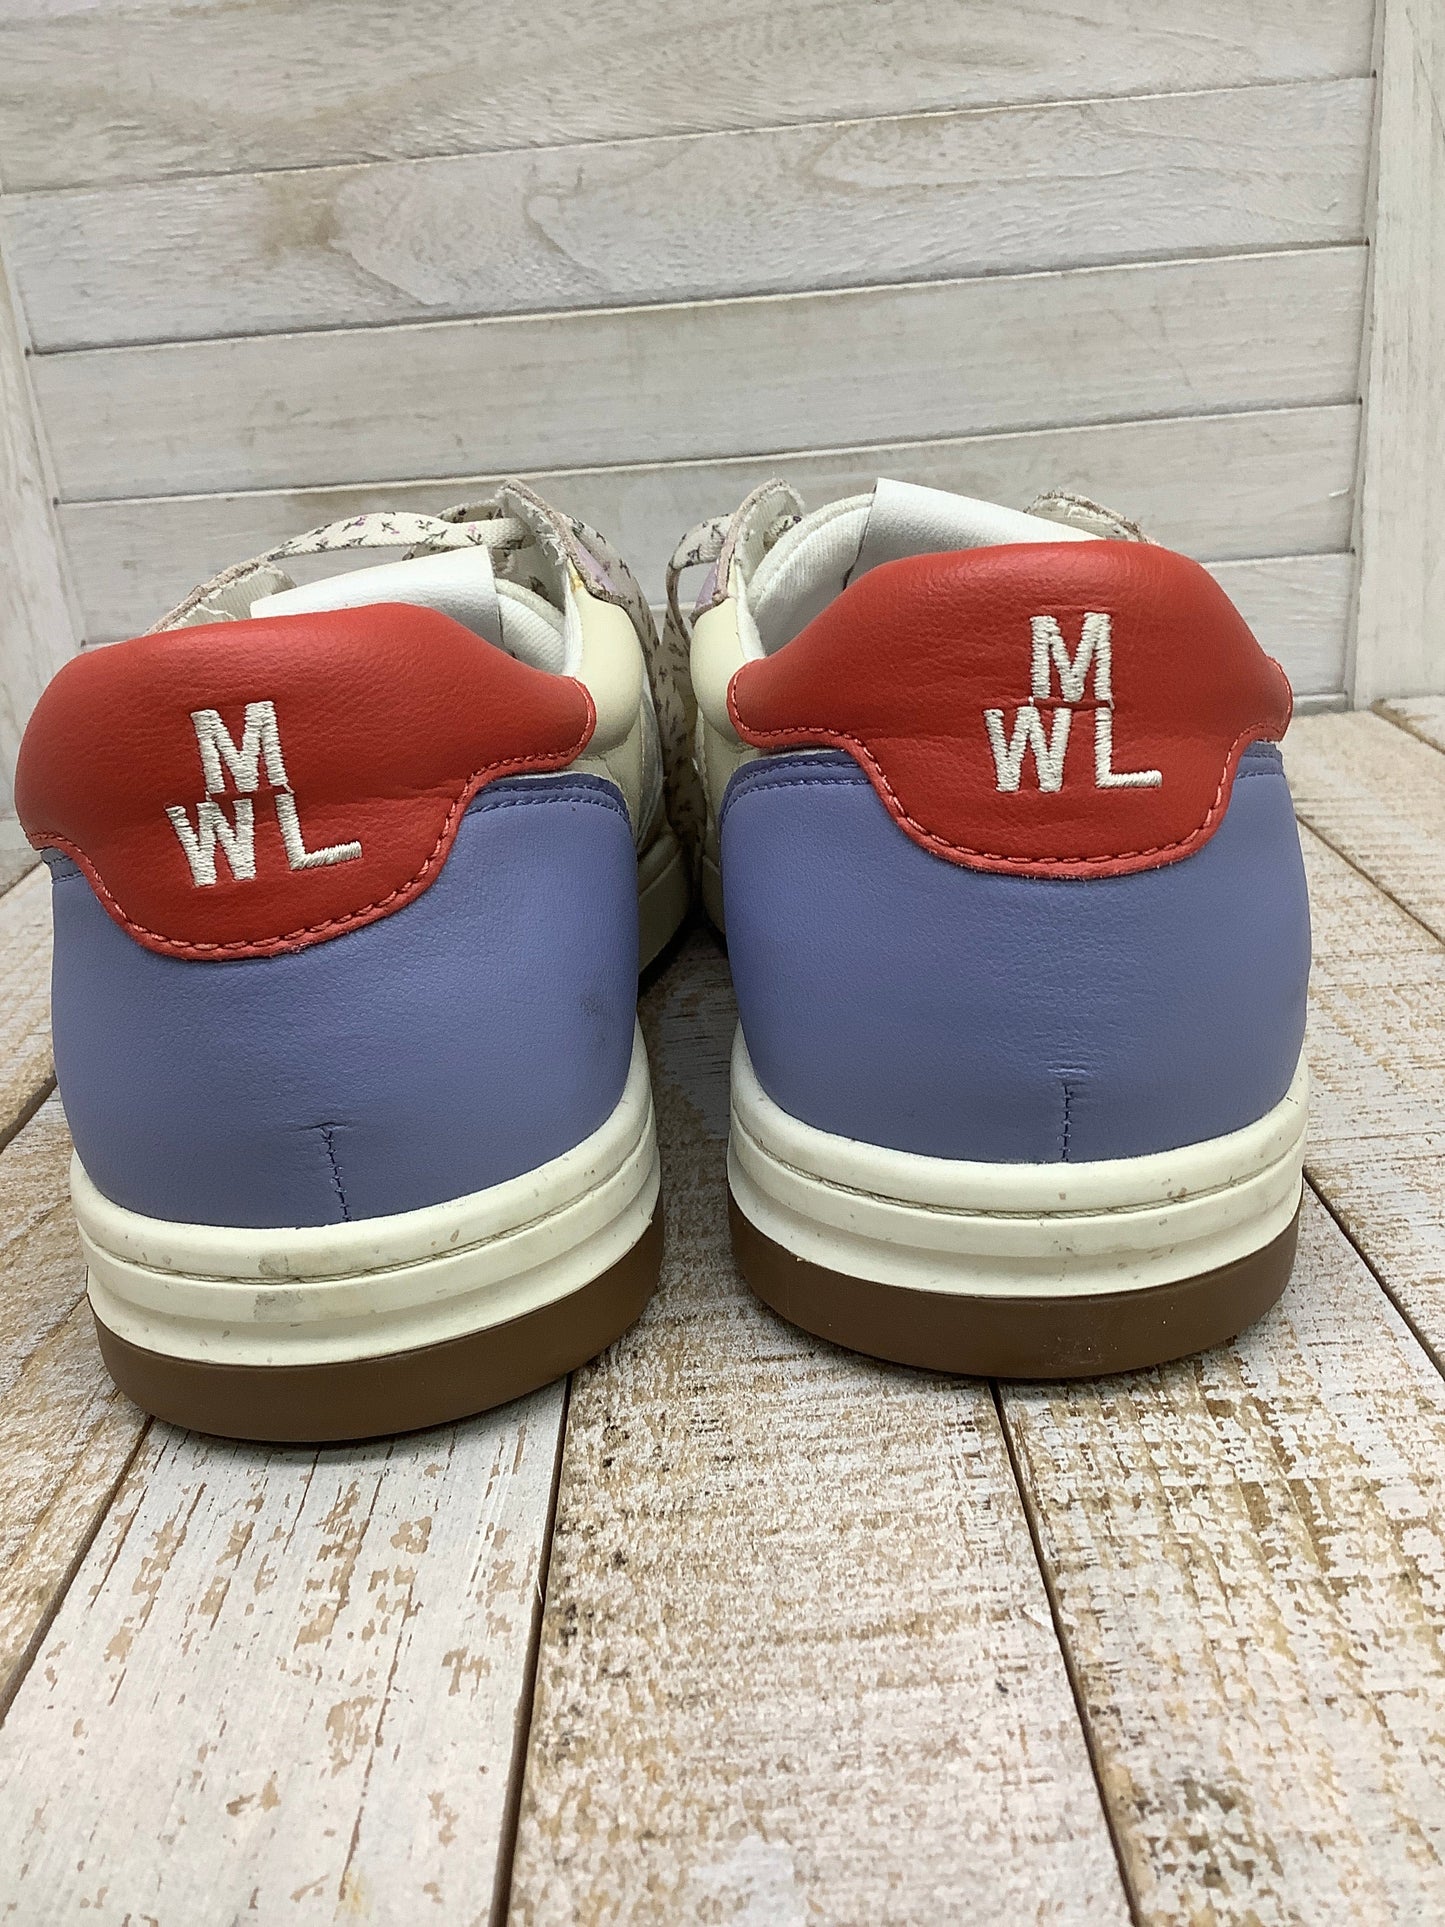 Multi-colored Shoes Sneakers Madewell, Size 7